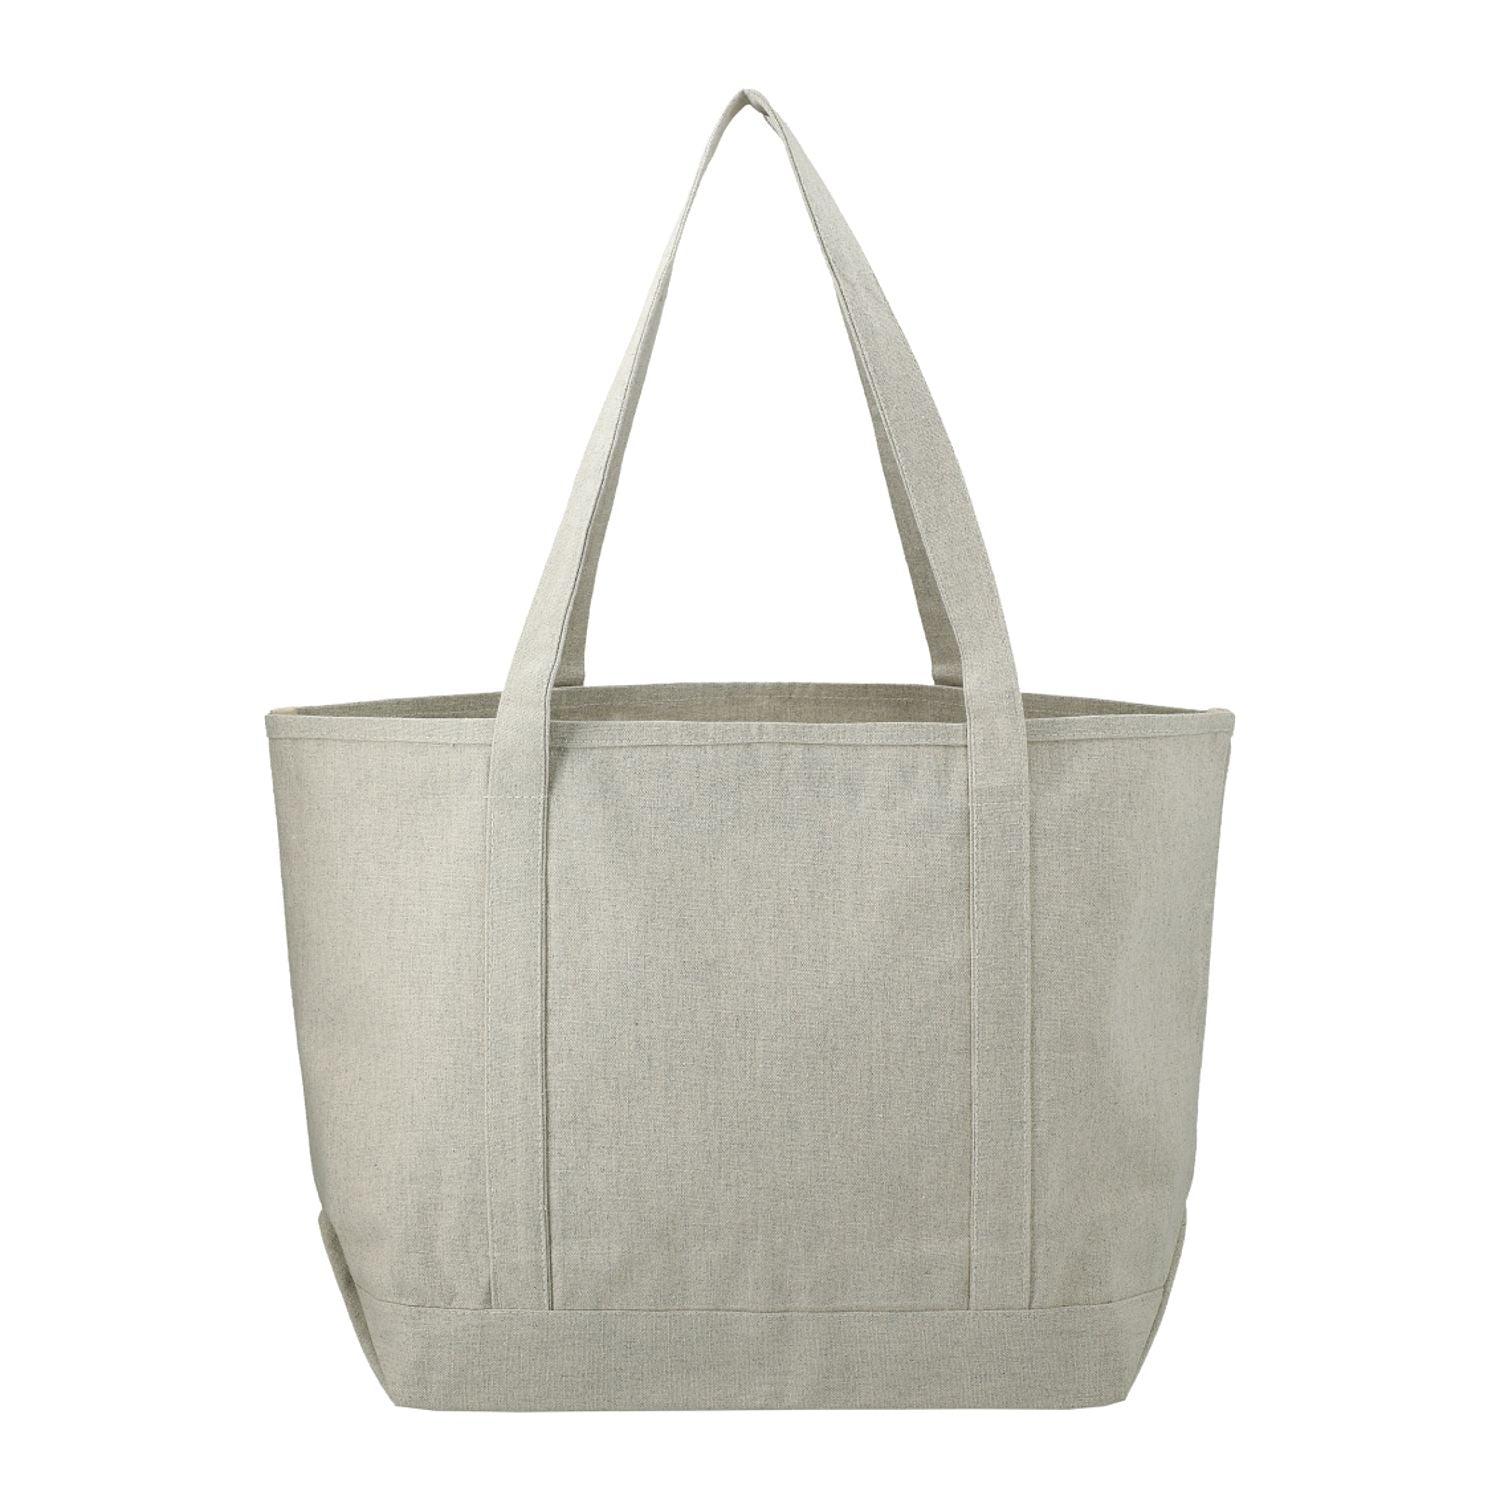 Customizable Repose 10oz Recycled Cotton Boat Tote in gray.